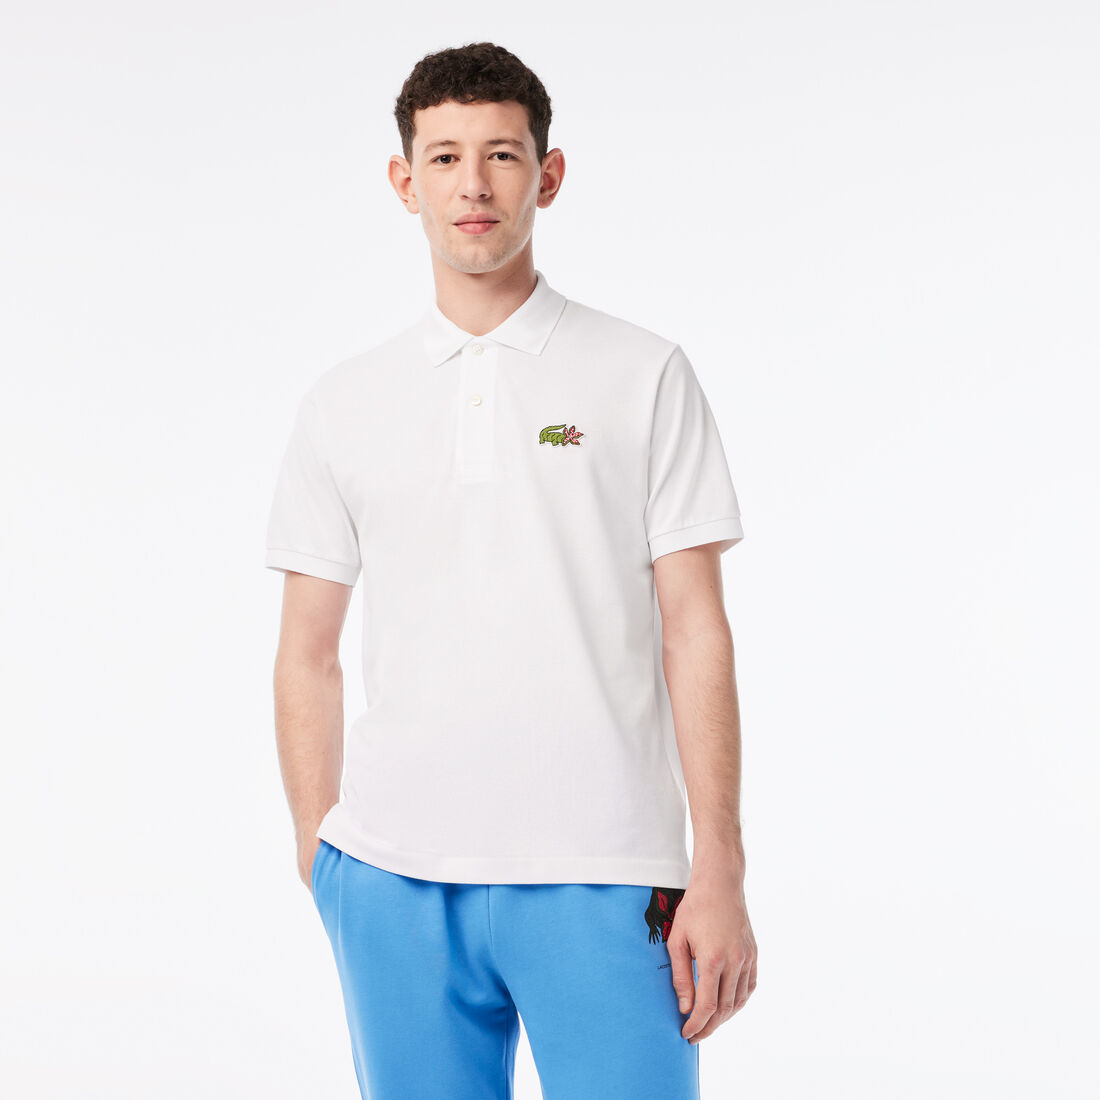 Forkæle ting Predictor Lacoste Factory Outlet: Outlet,Sale Lacoste Shoes,Clothing | Lacoste USA